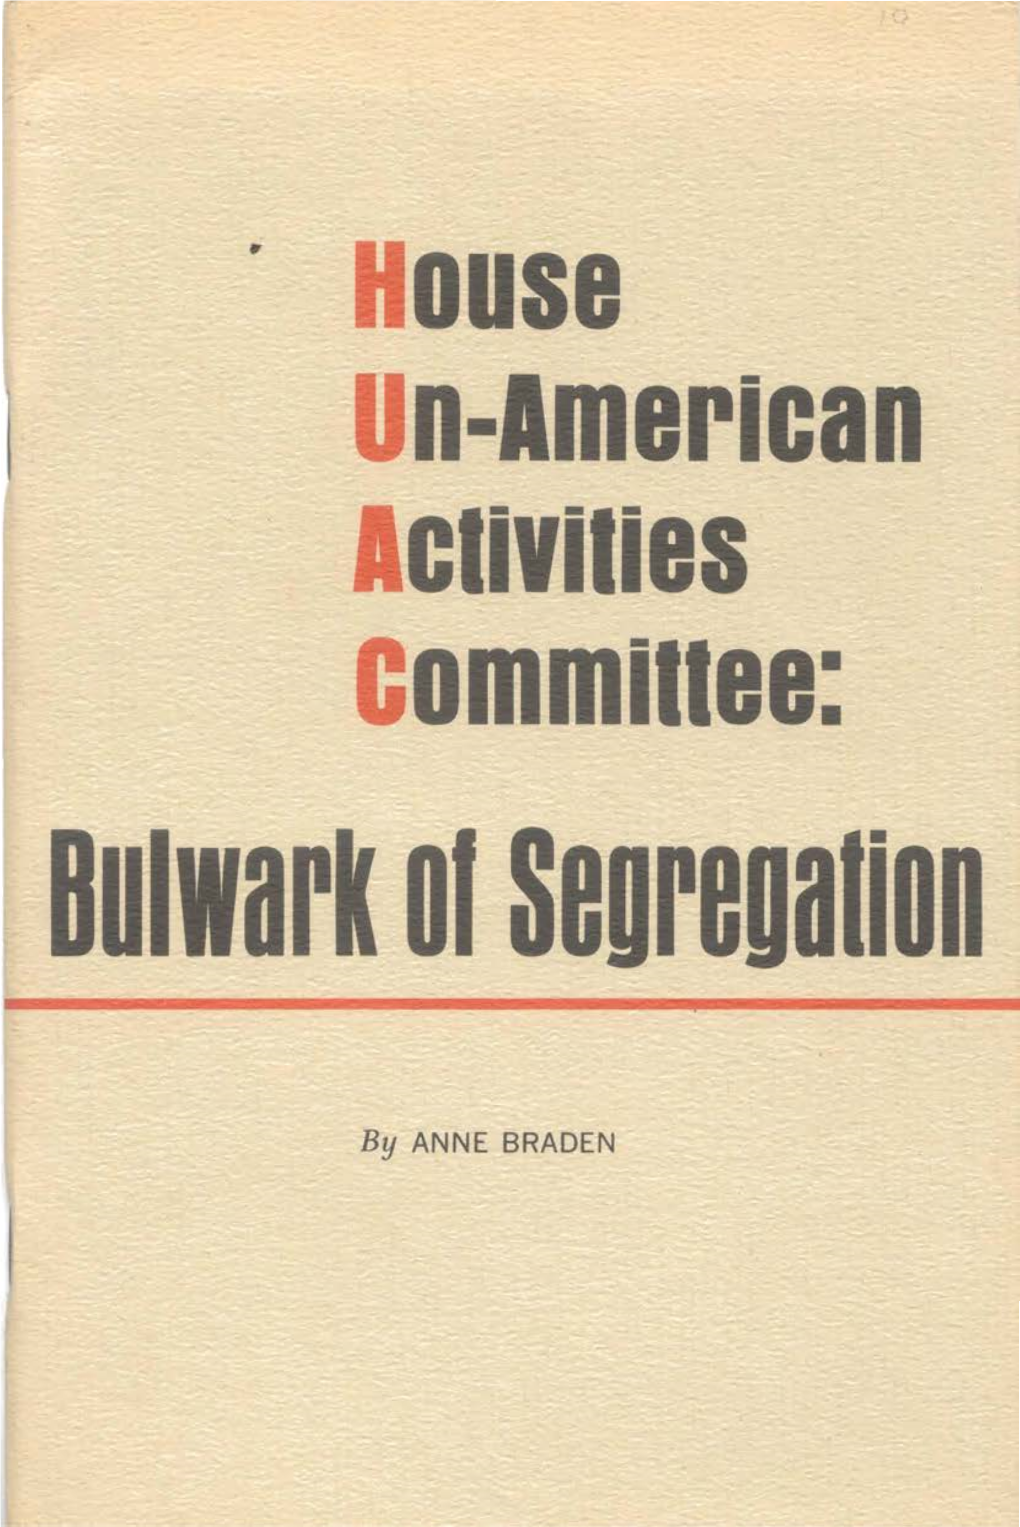 House Un-American Activities Committee (HUAC); Its Counterpart in the U.S